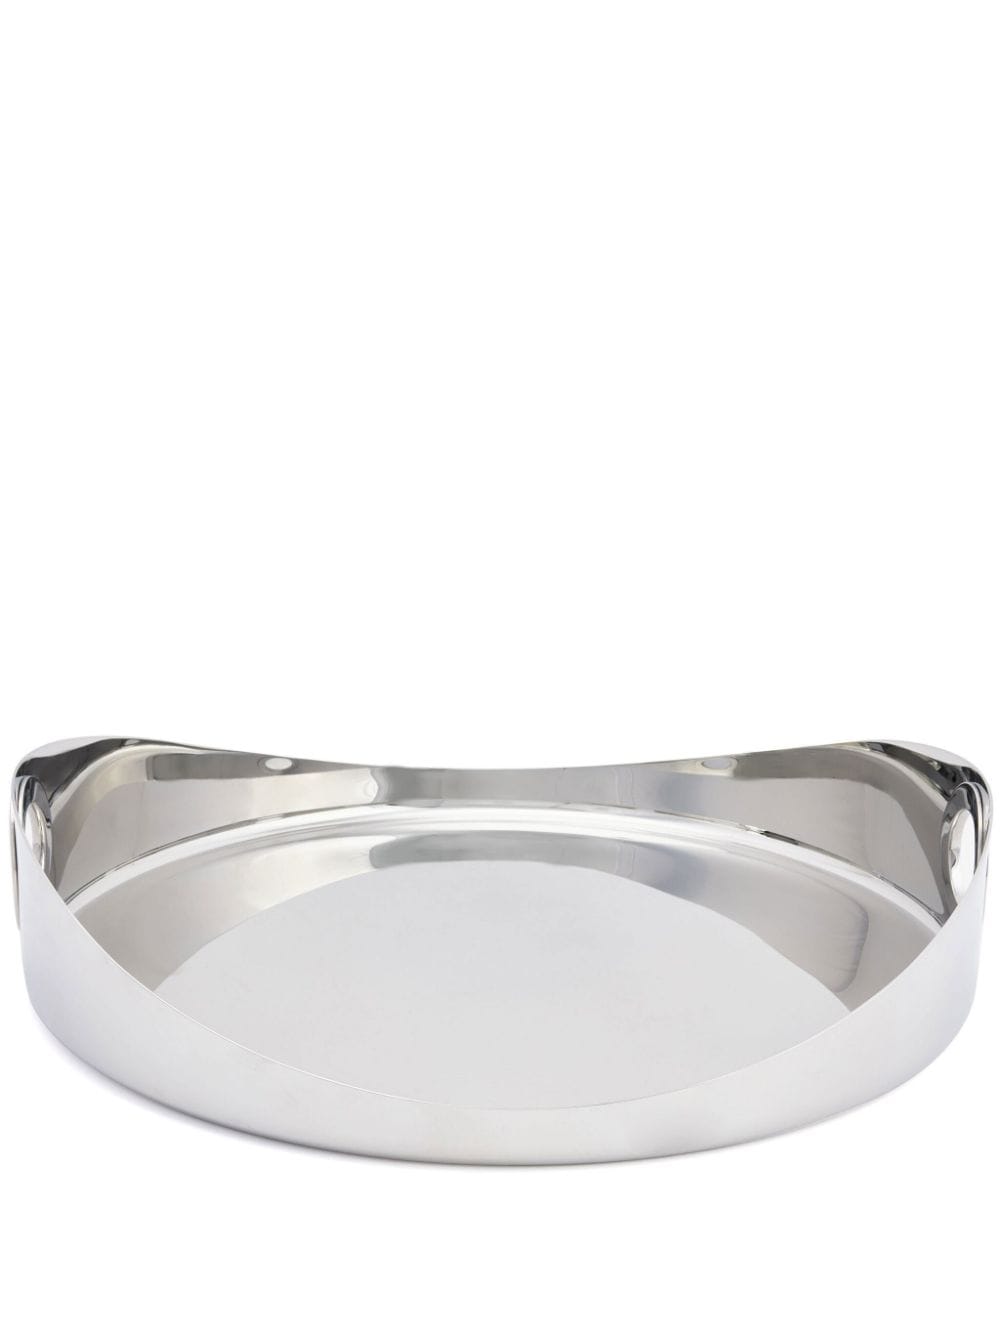 Christofle Oh! De Christofle stainless steel tray - Silver von Christofle